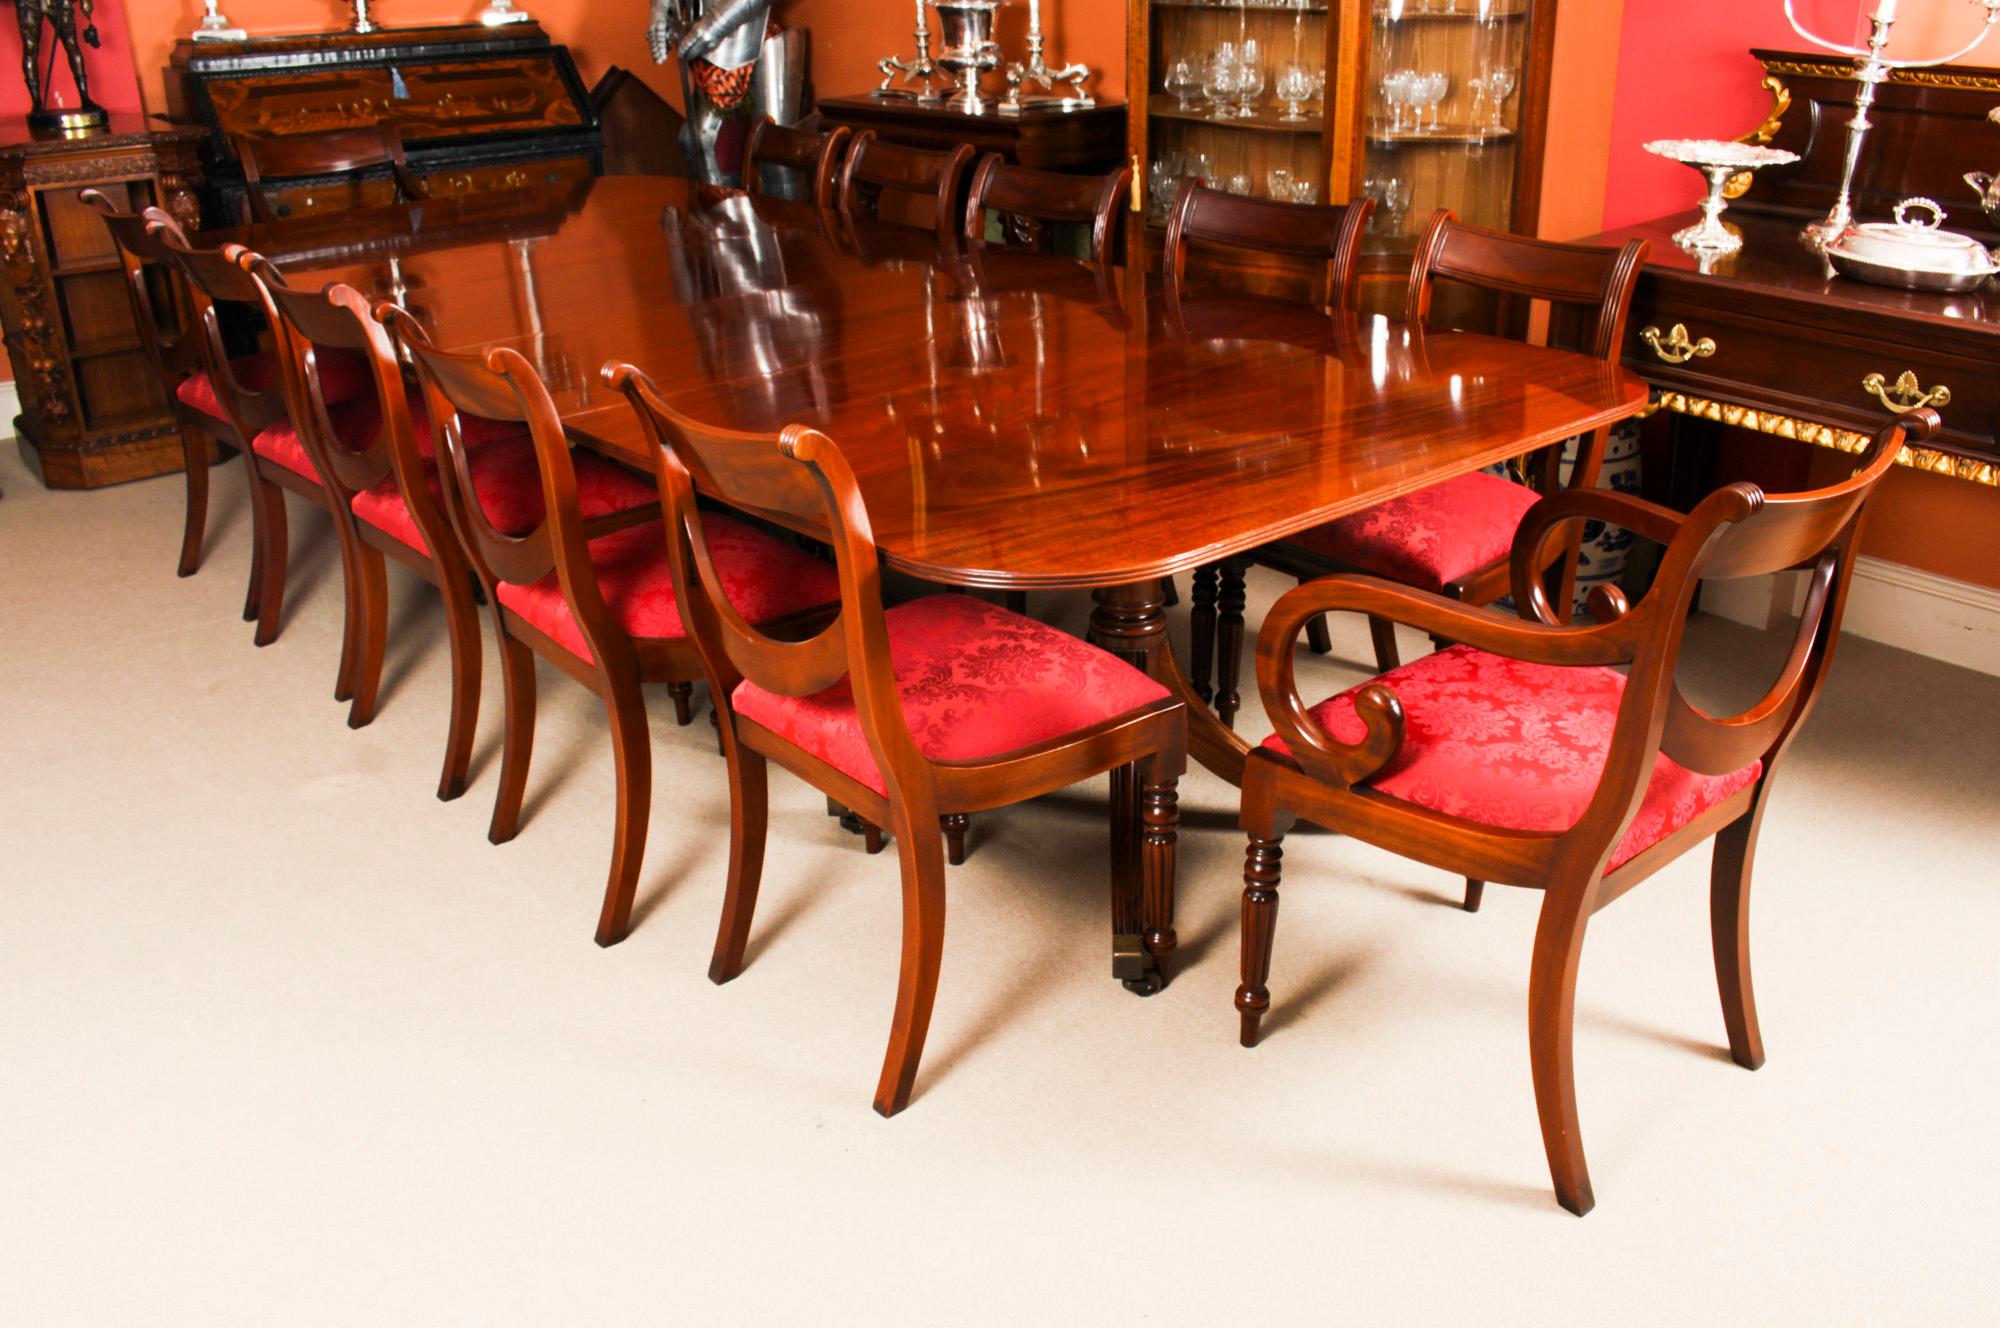 This is fabulous Vintage Regency Revival dining table by the master cabinet maker William Tillman, Circa 1980 in date.

The table is made of stunning solid flame mahogany and is raised on twin 